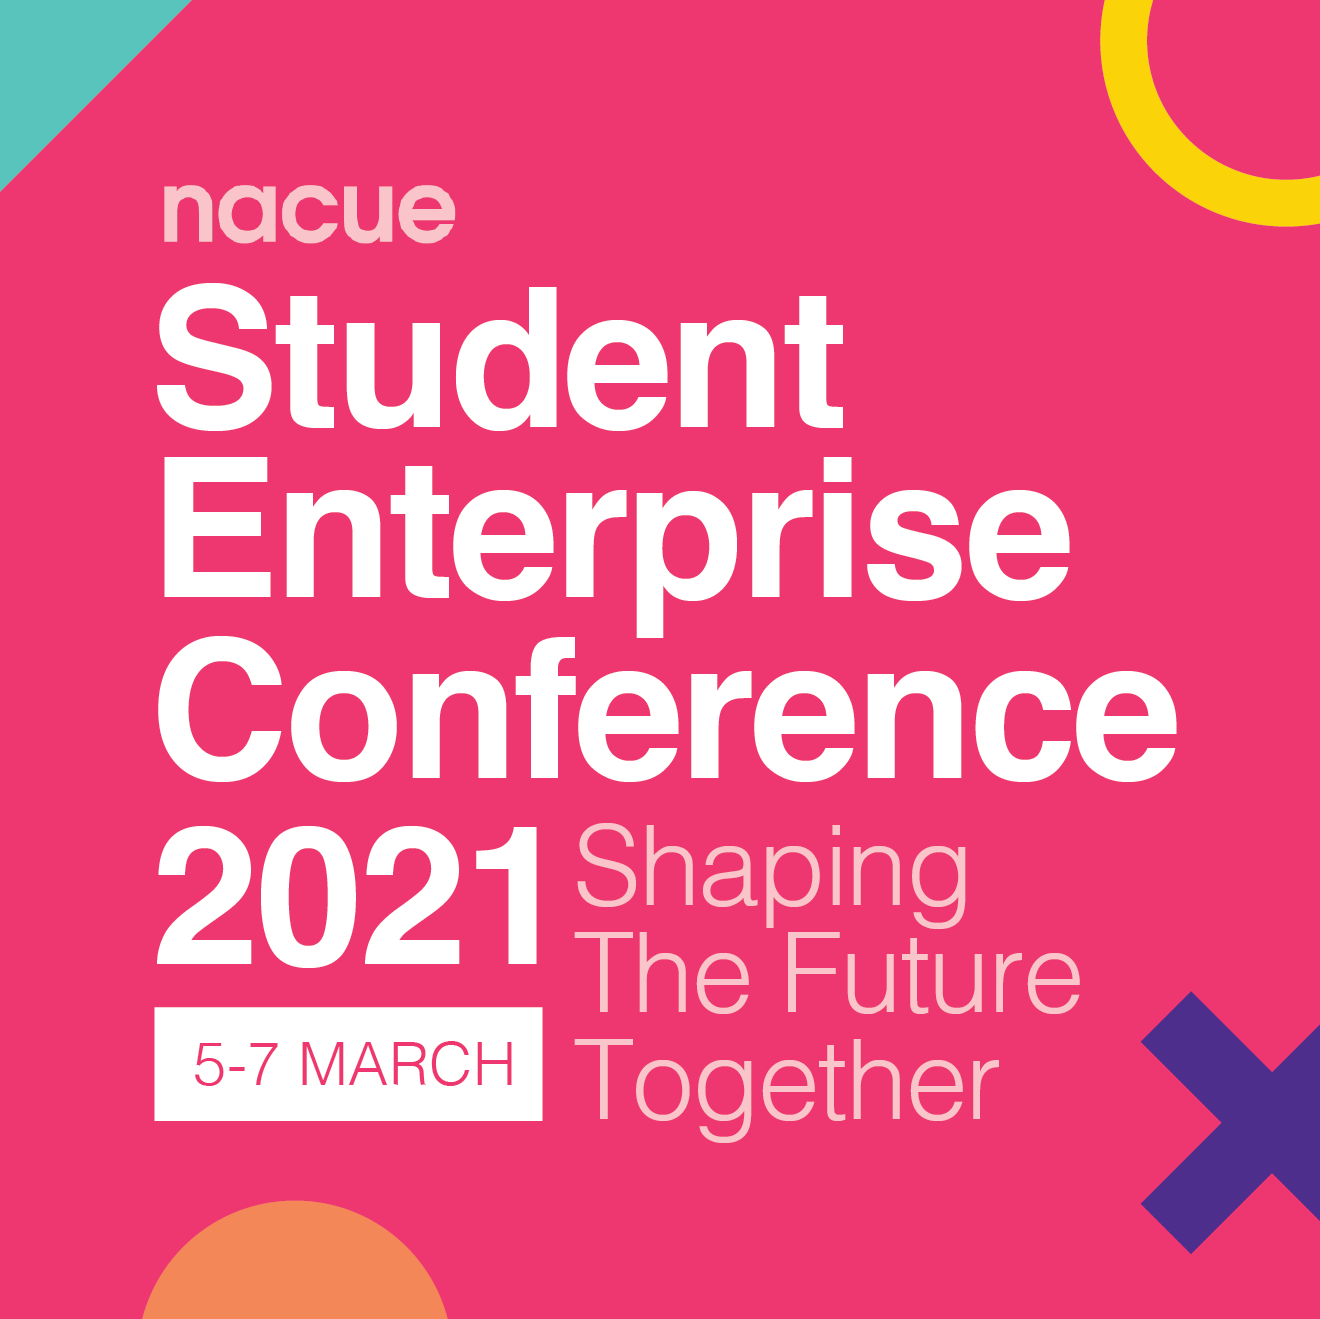 The Student Enterprise Conference 2021